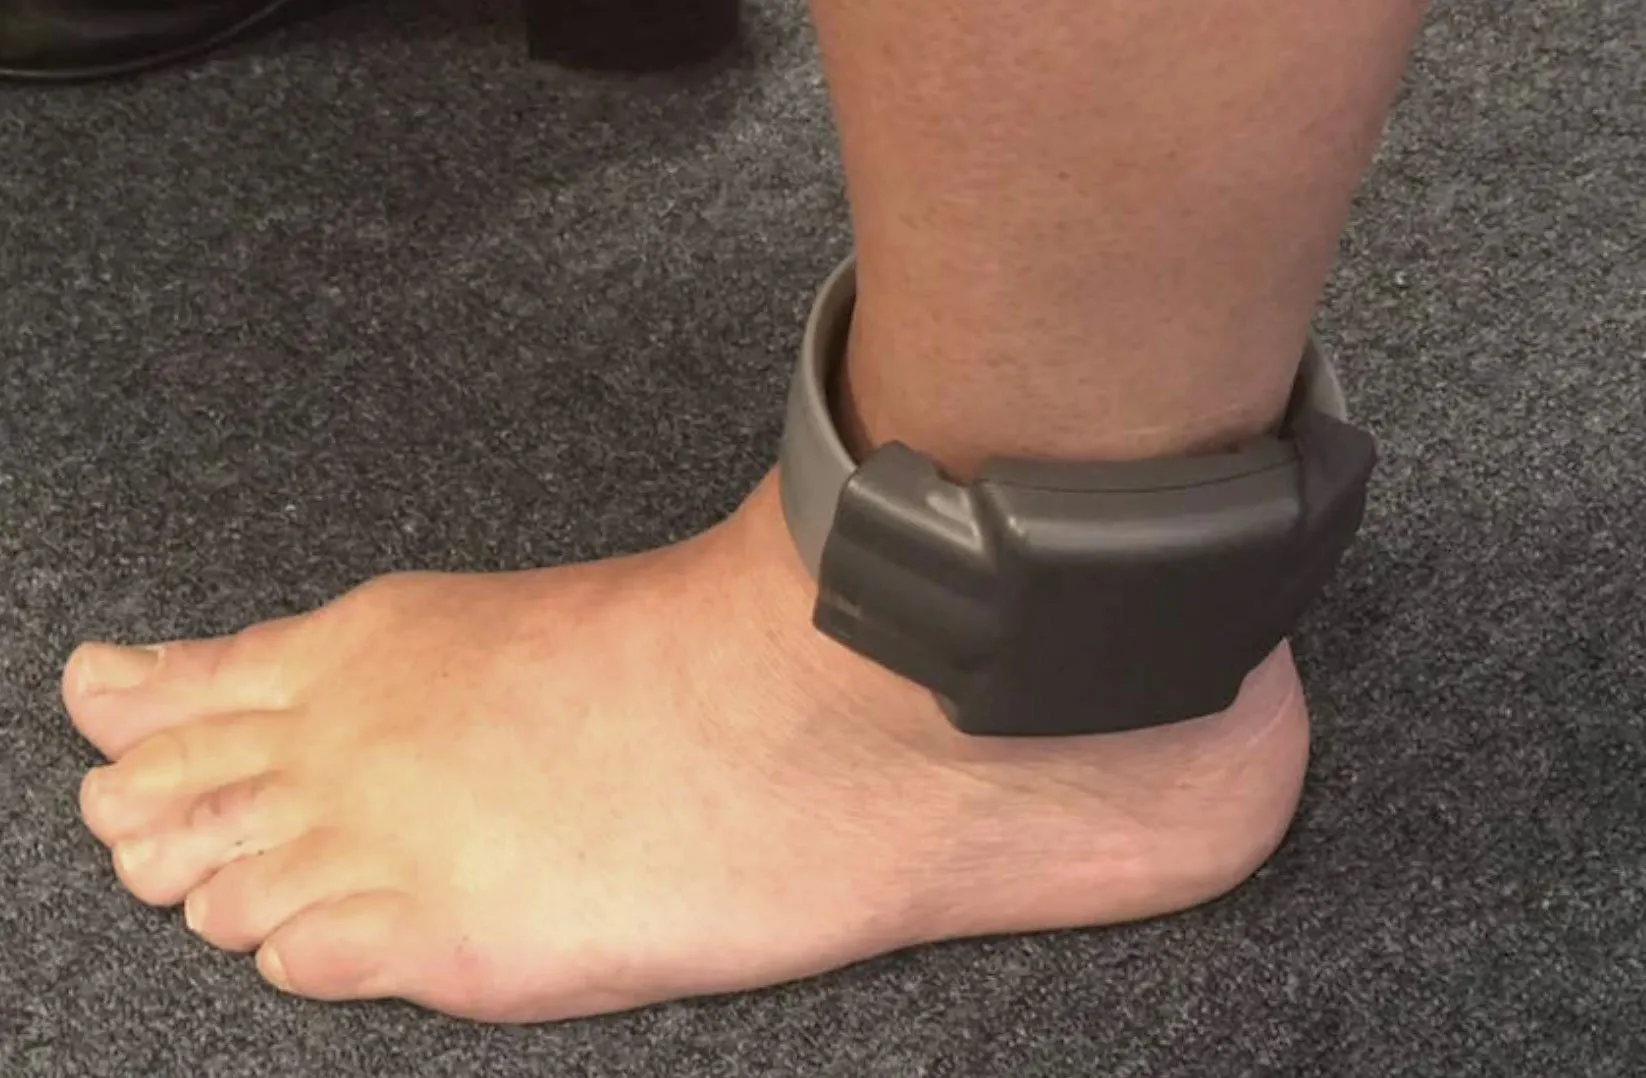 What to know about ankle monitors - ABC13 Houston